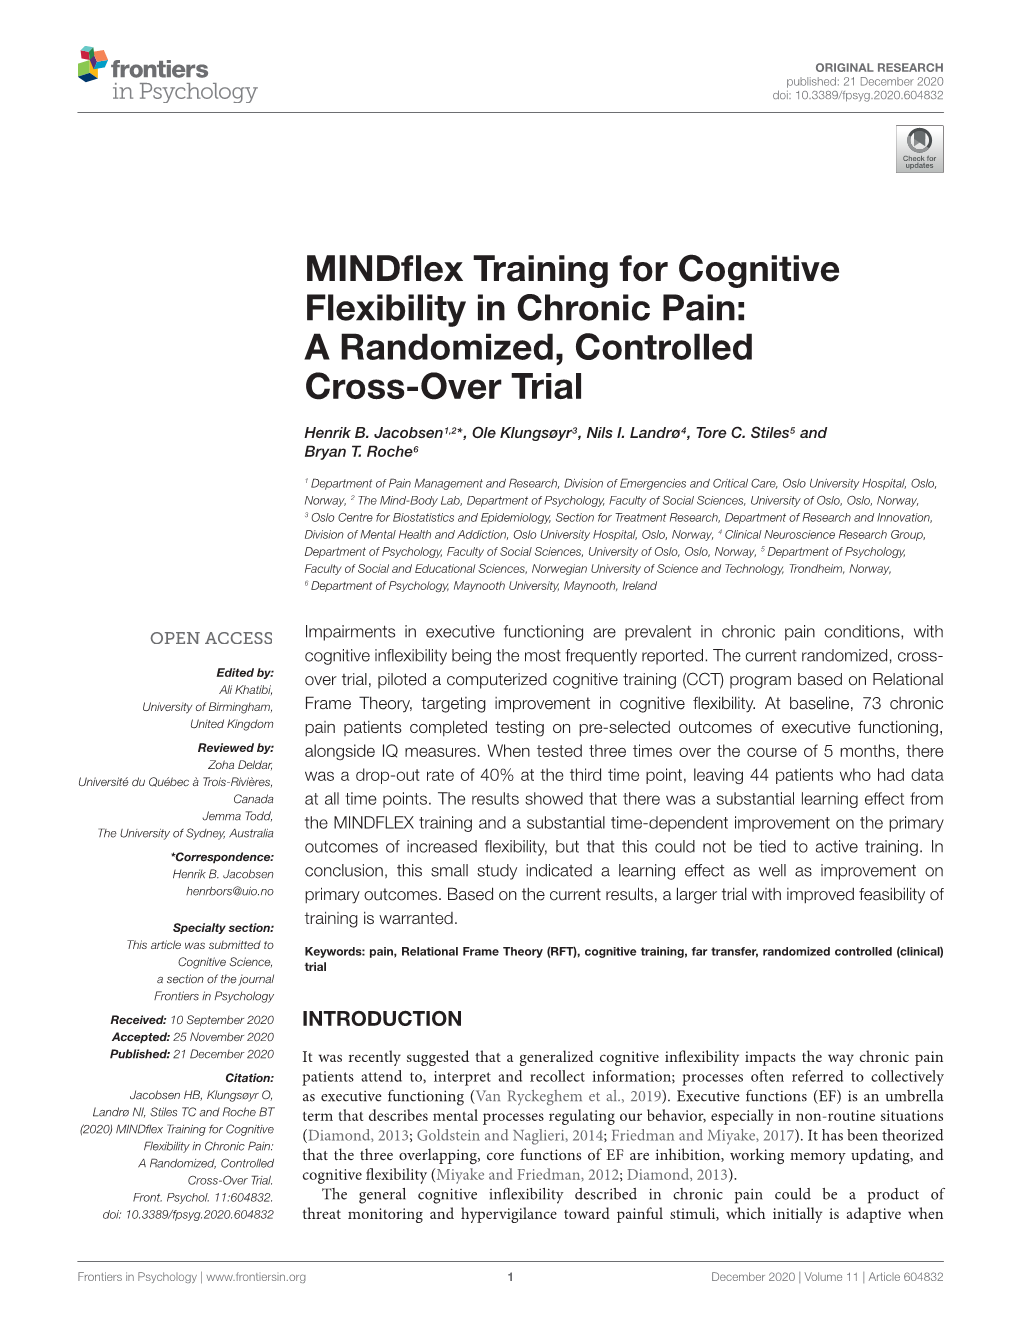 Mindflex Training for Cognitive Flexibility in Chronic Pain